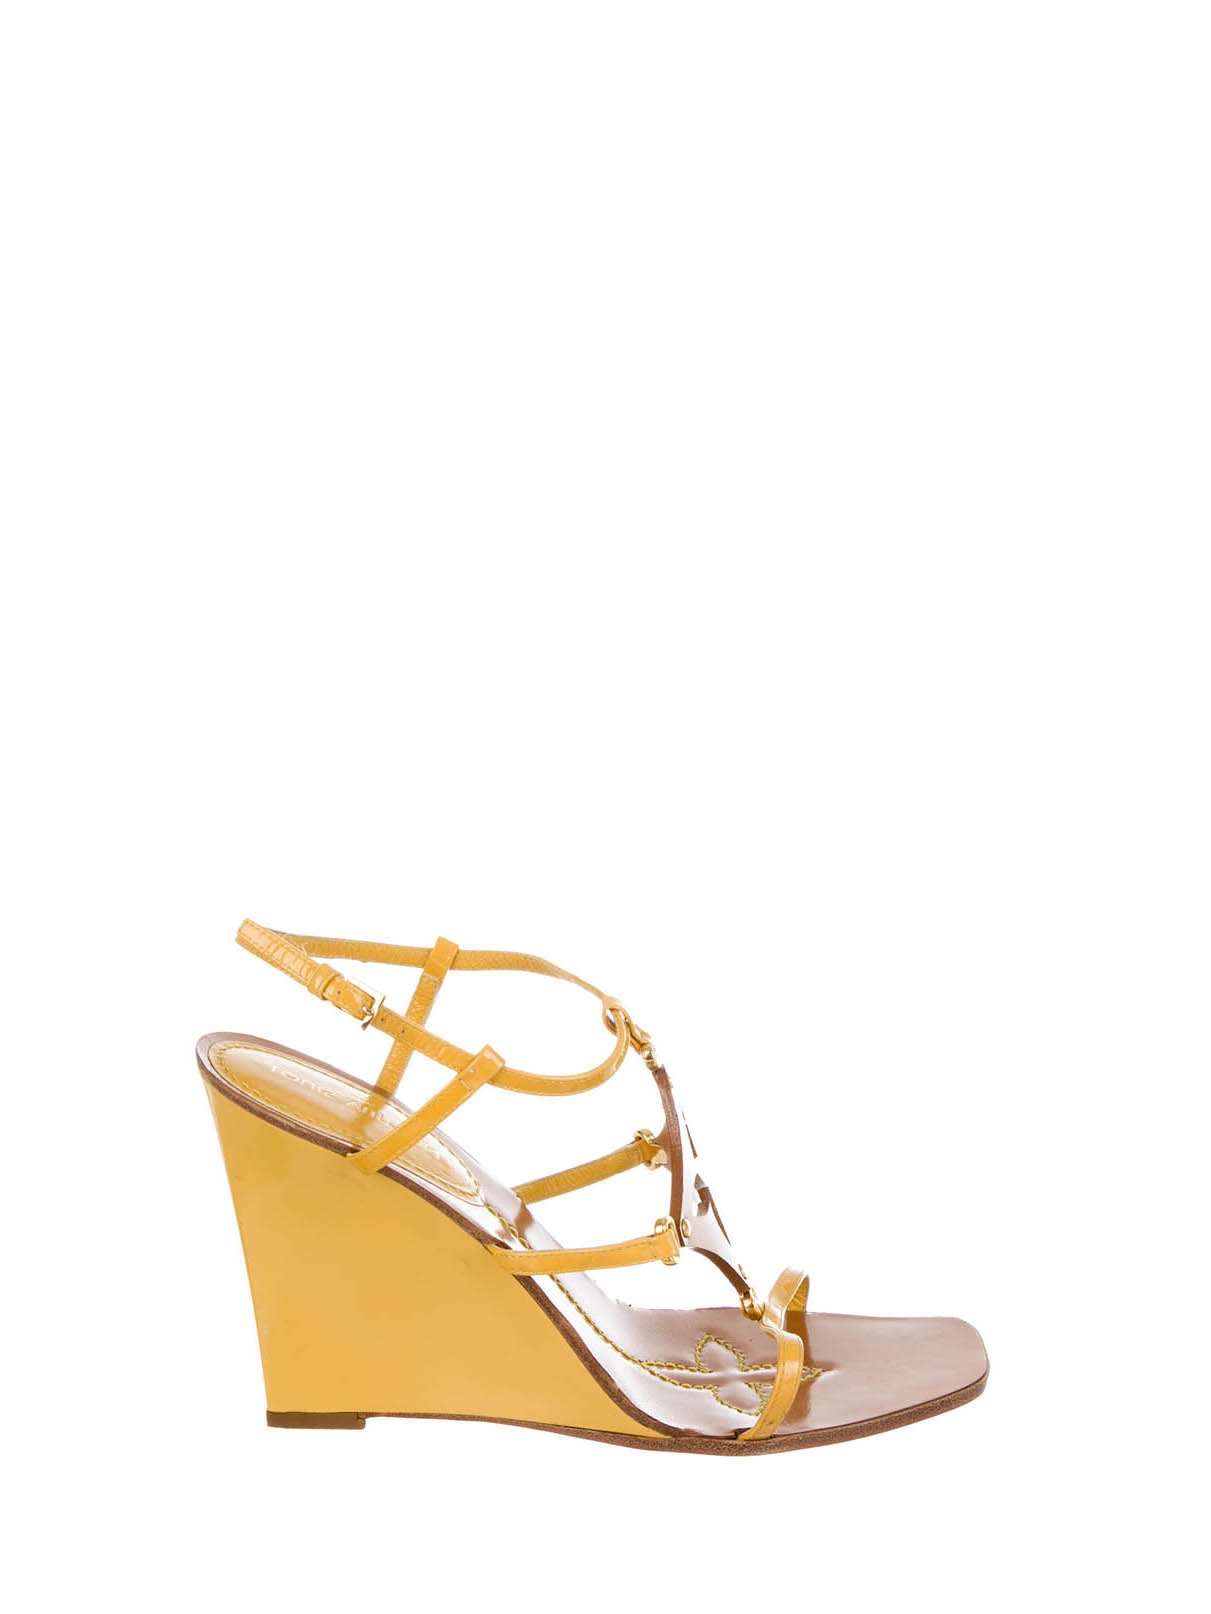 Louise Paris - LOUIS VUITTON Tan brown leather and yellow patent leather wedge sandals Retail ...